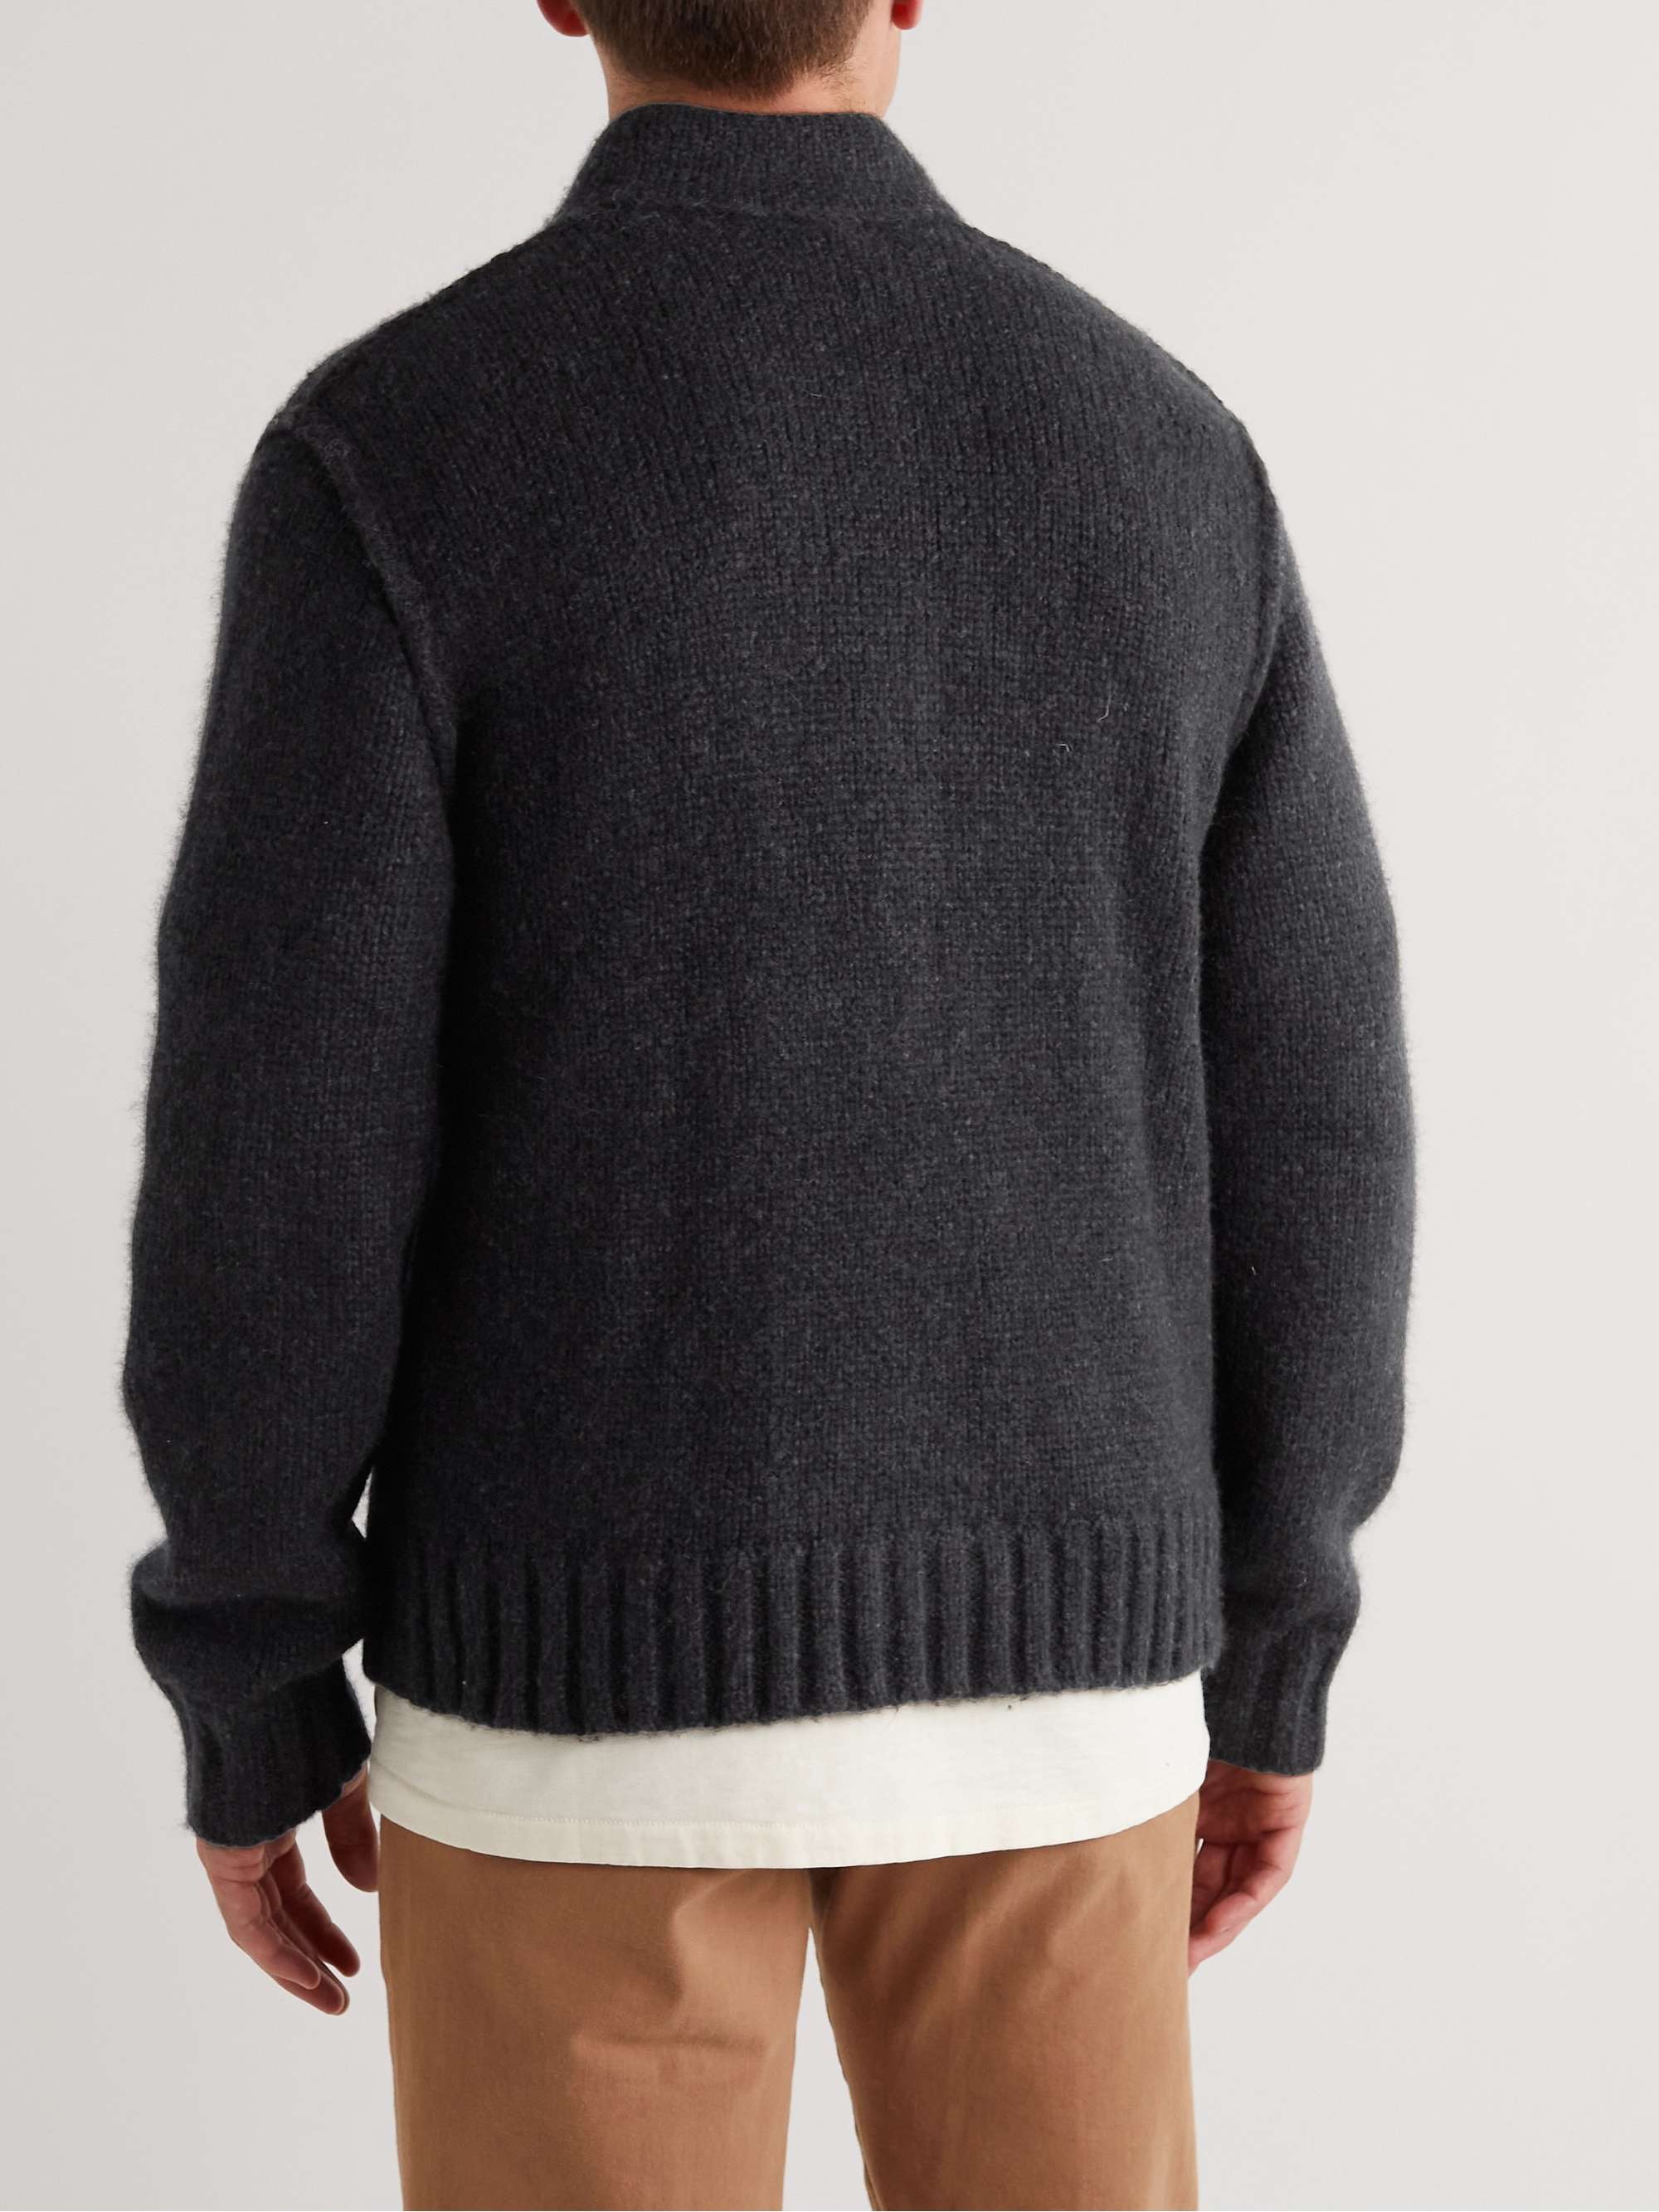 JAMES PERSE Knitted Zip-Up Cardigan